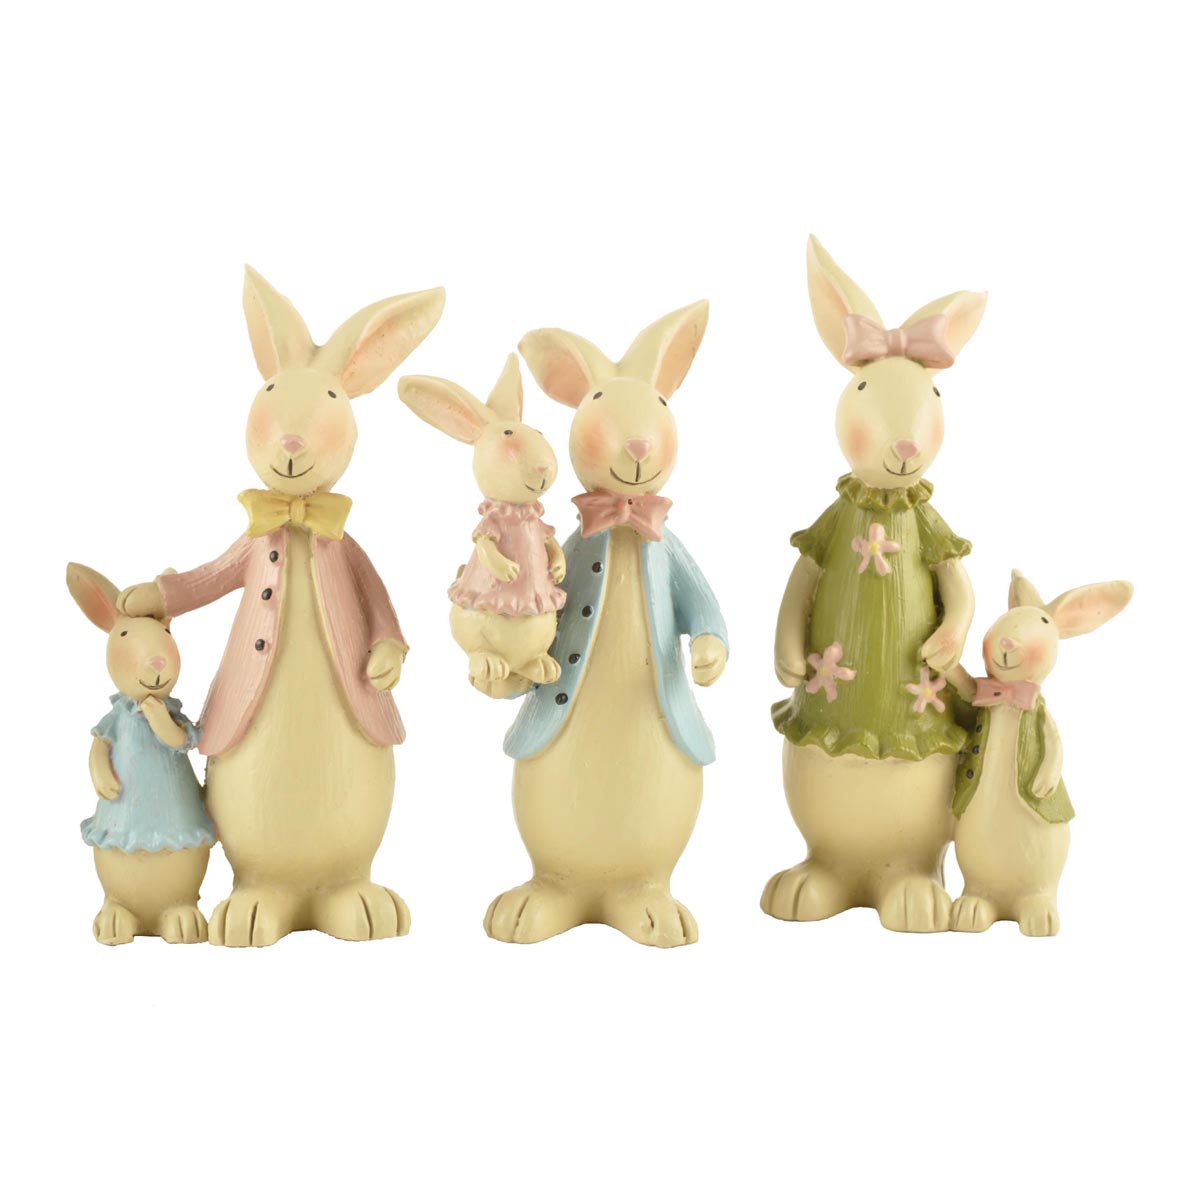 Ennas easter statue oem for holiday gift